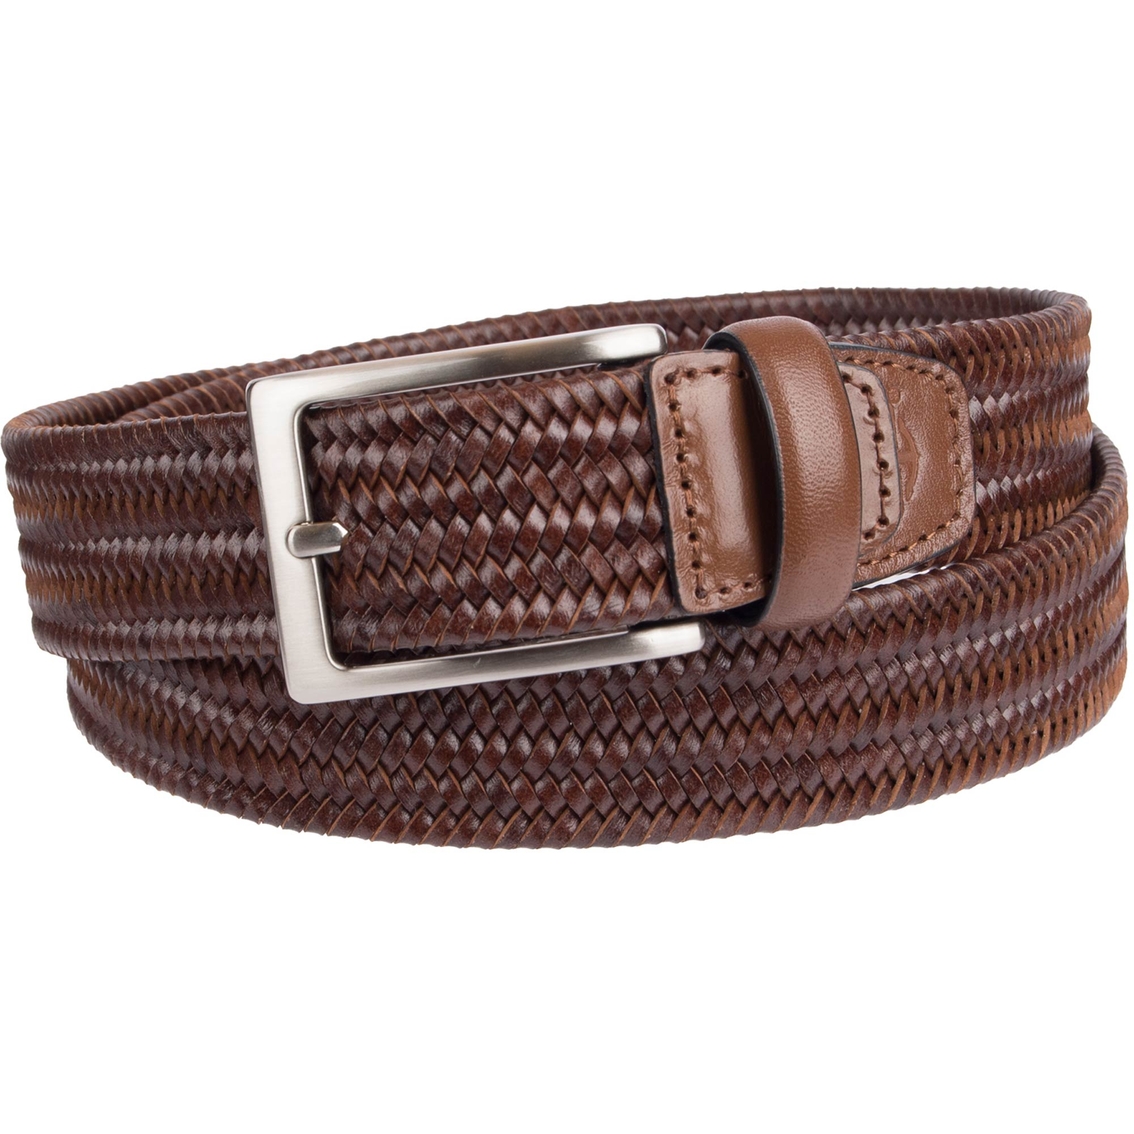 Dockers Stretch Belt | Belts | Clothing & Accessories | Shop The Exchange